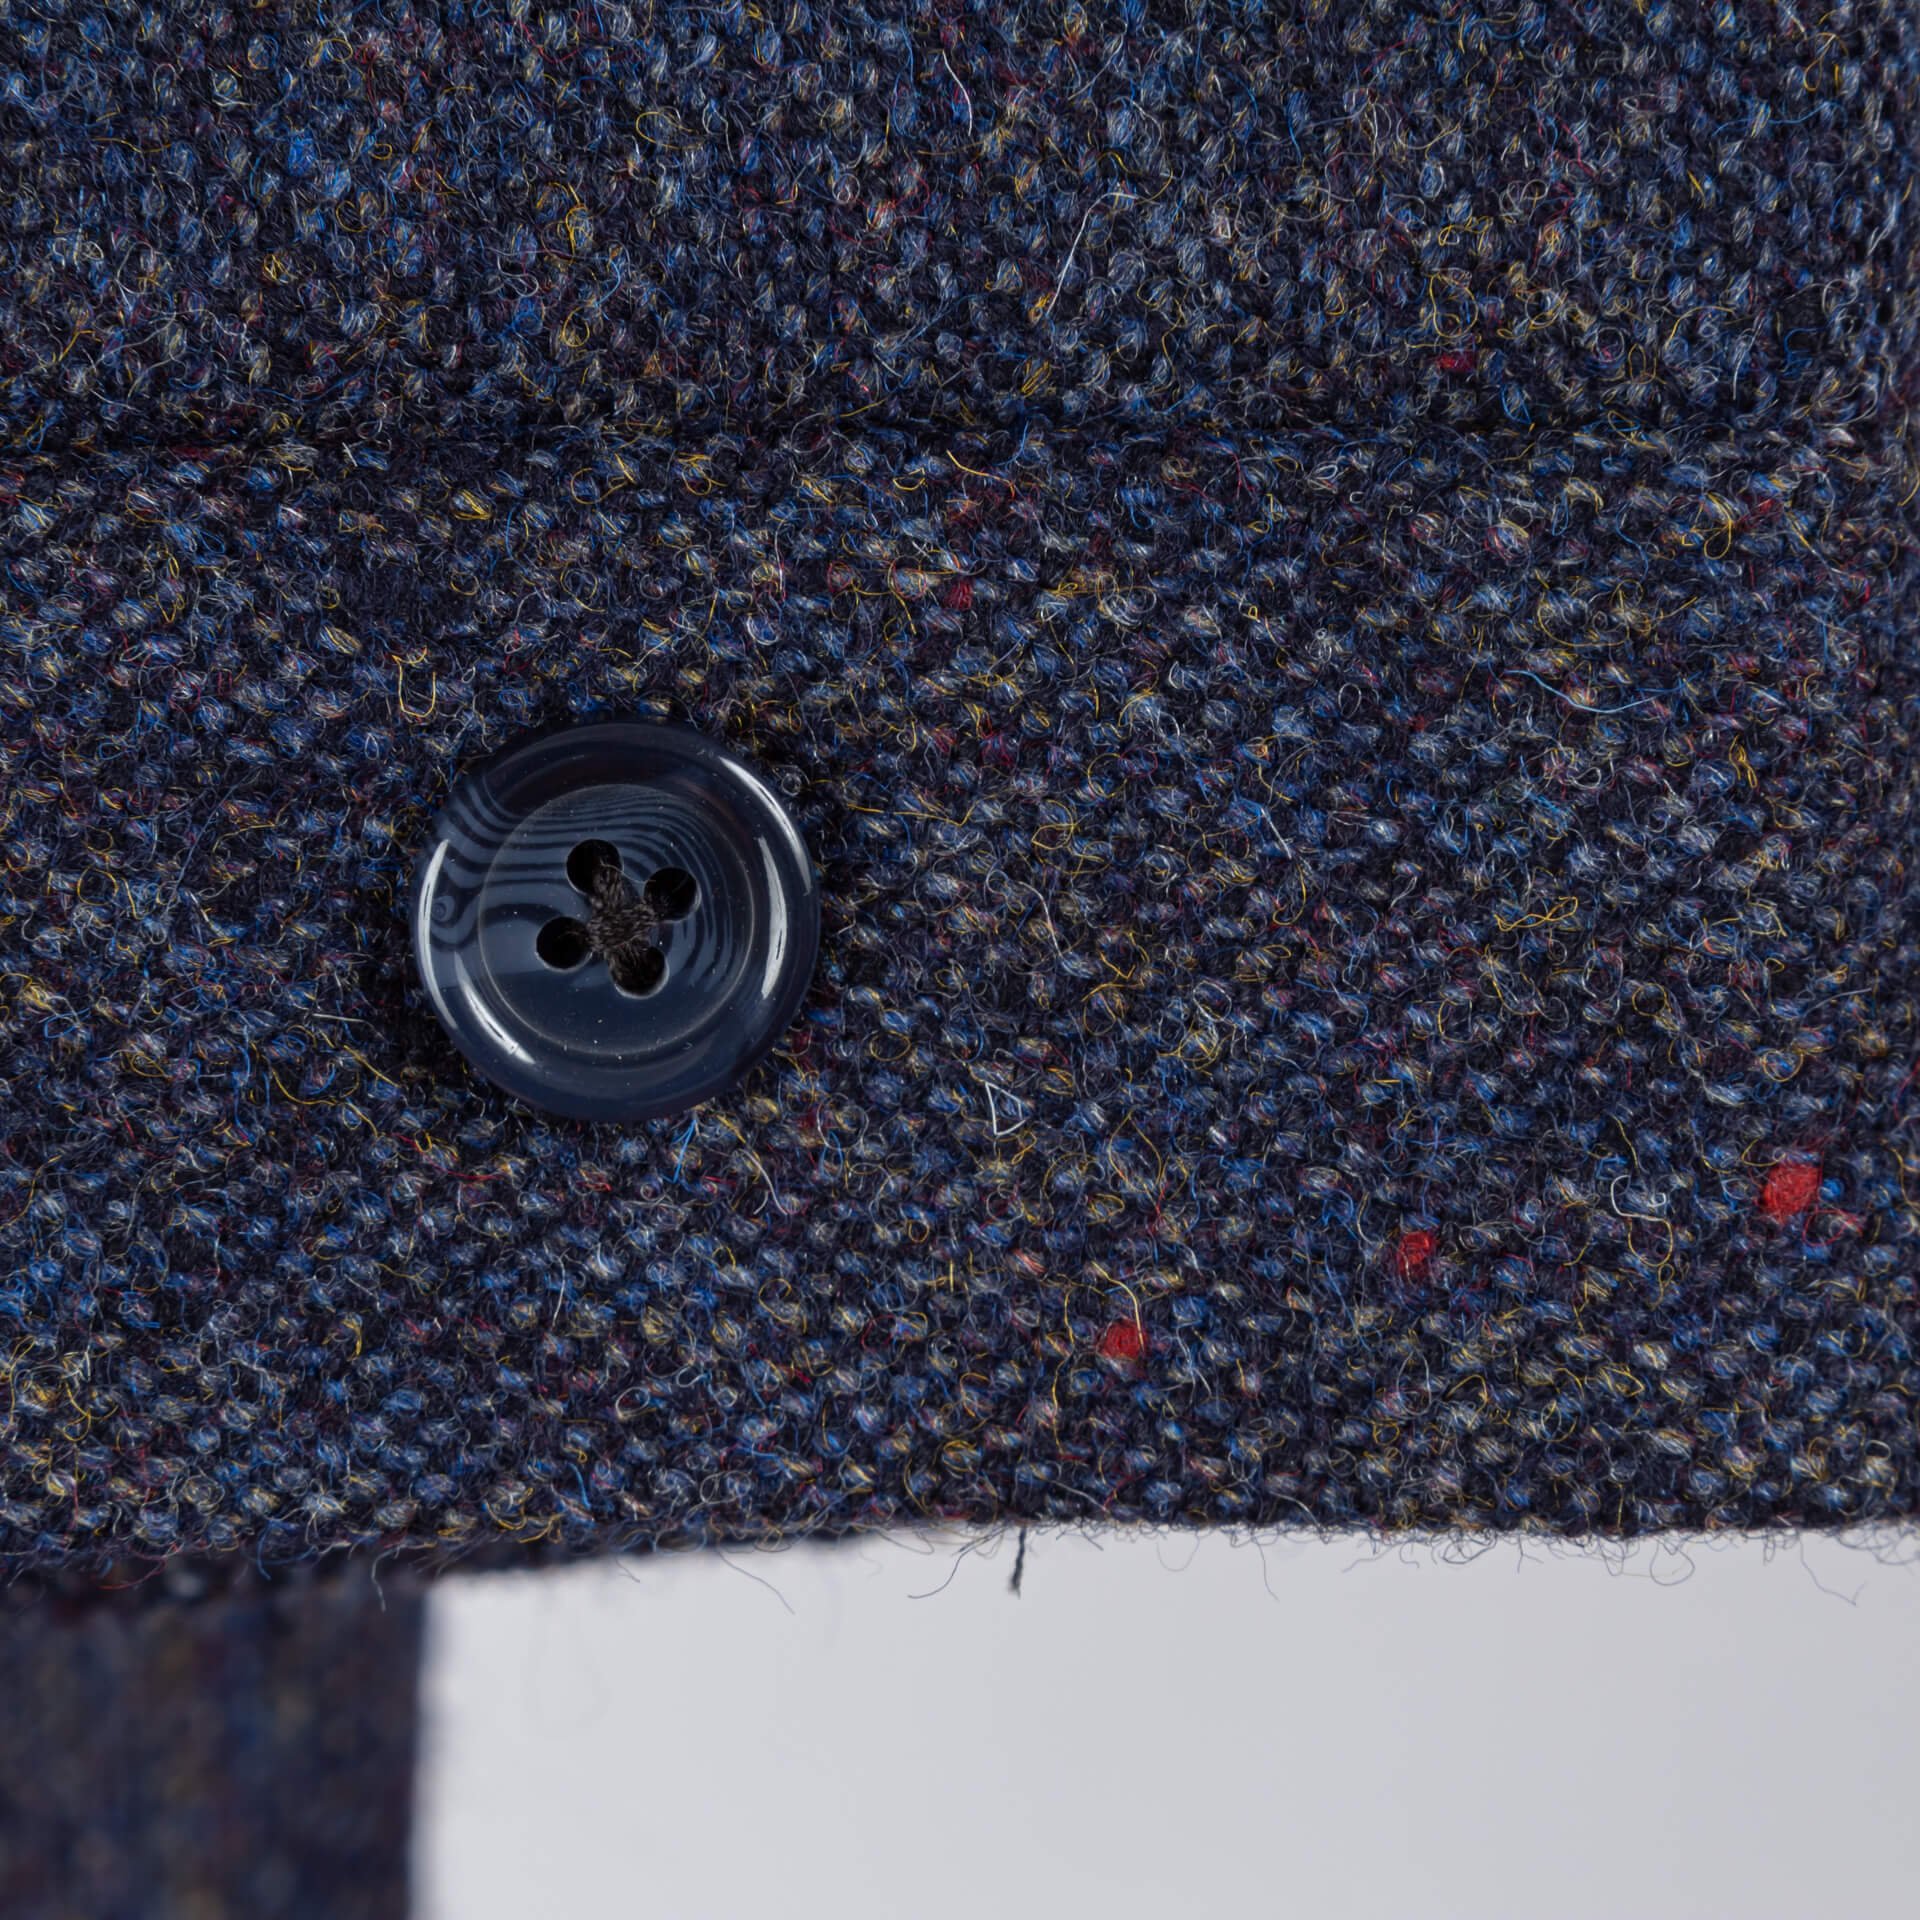 Donegal Tweed Trousers